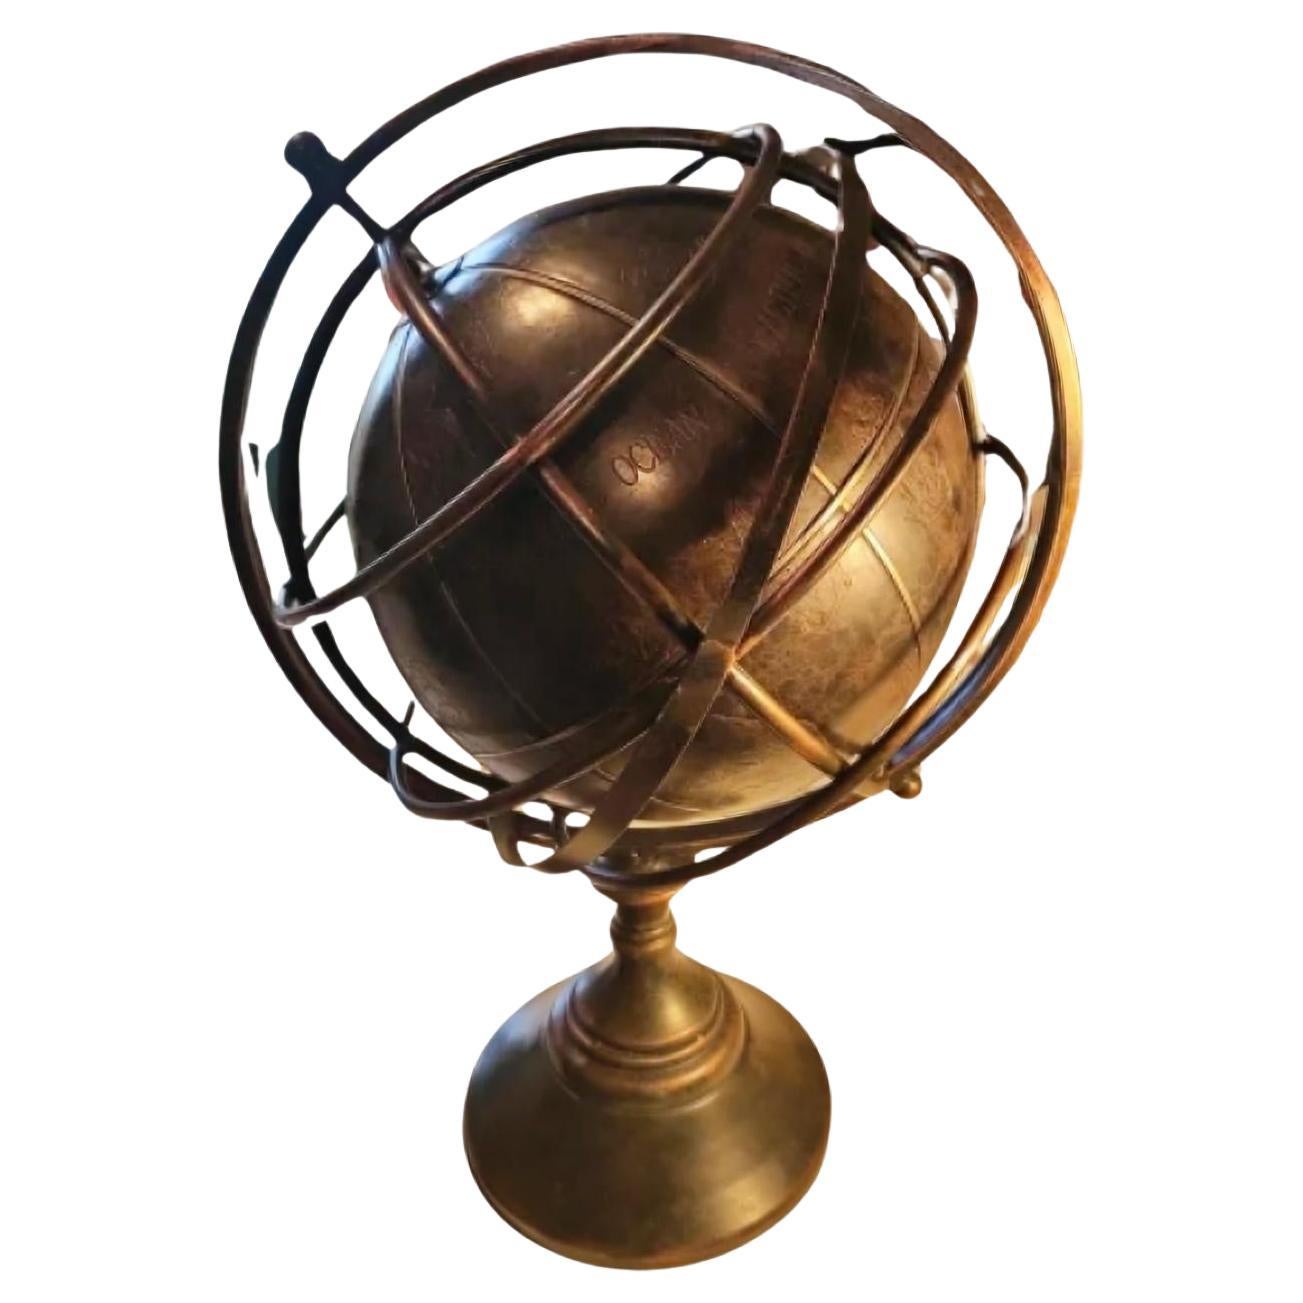 Rare English Nautical Globe with Armillary Sphere (1930) 20th Century For Sale